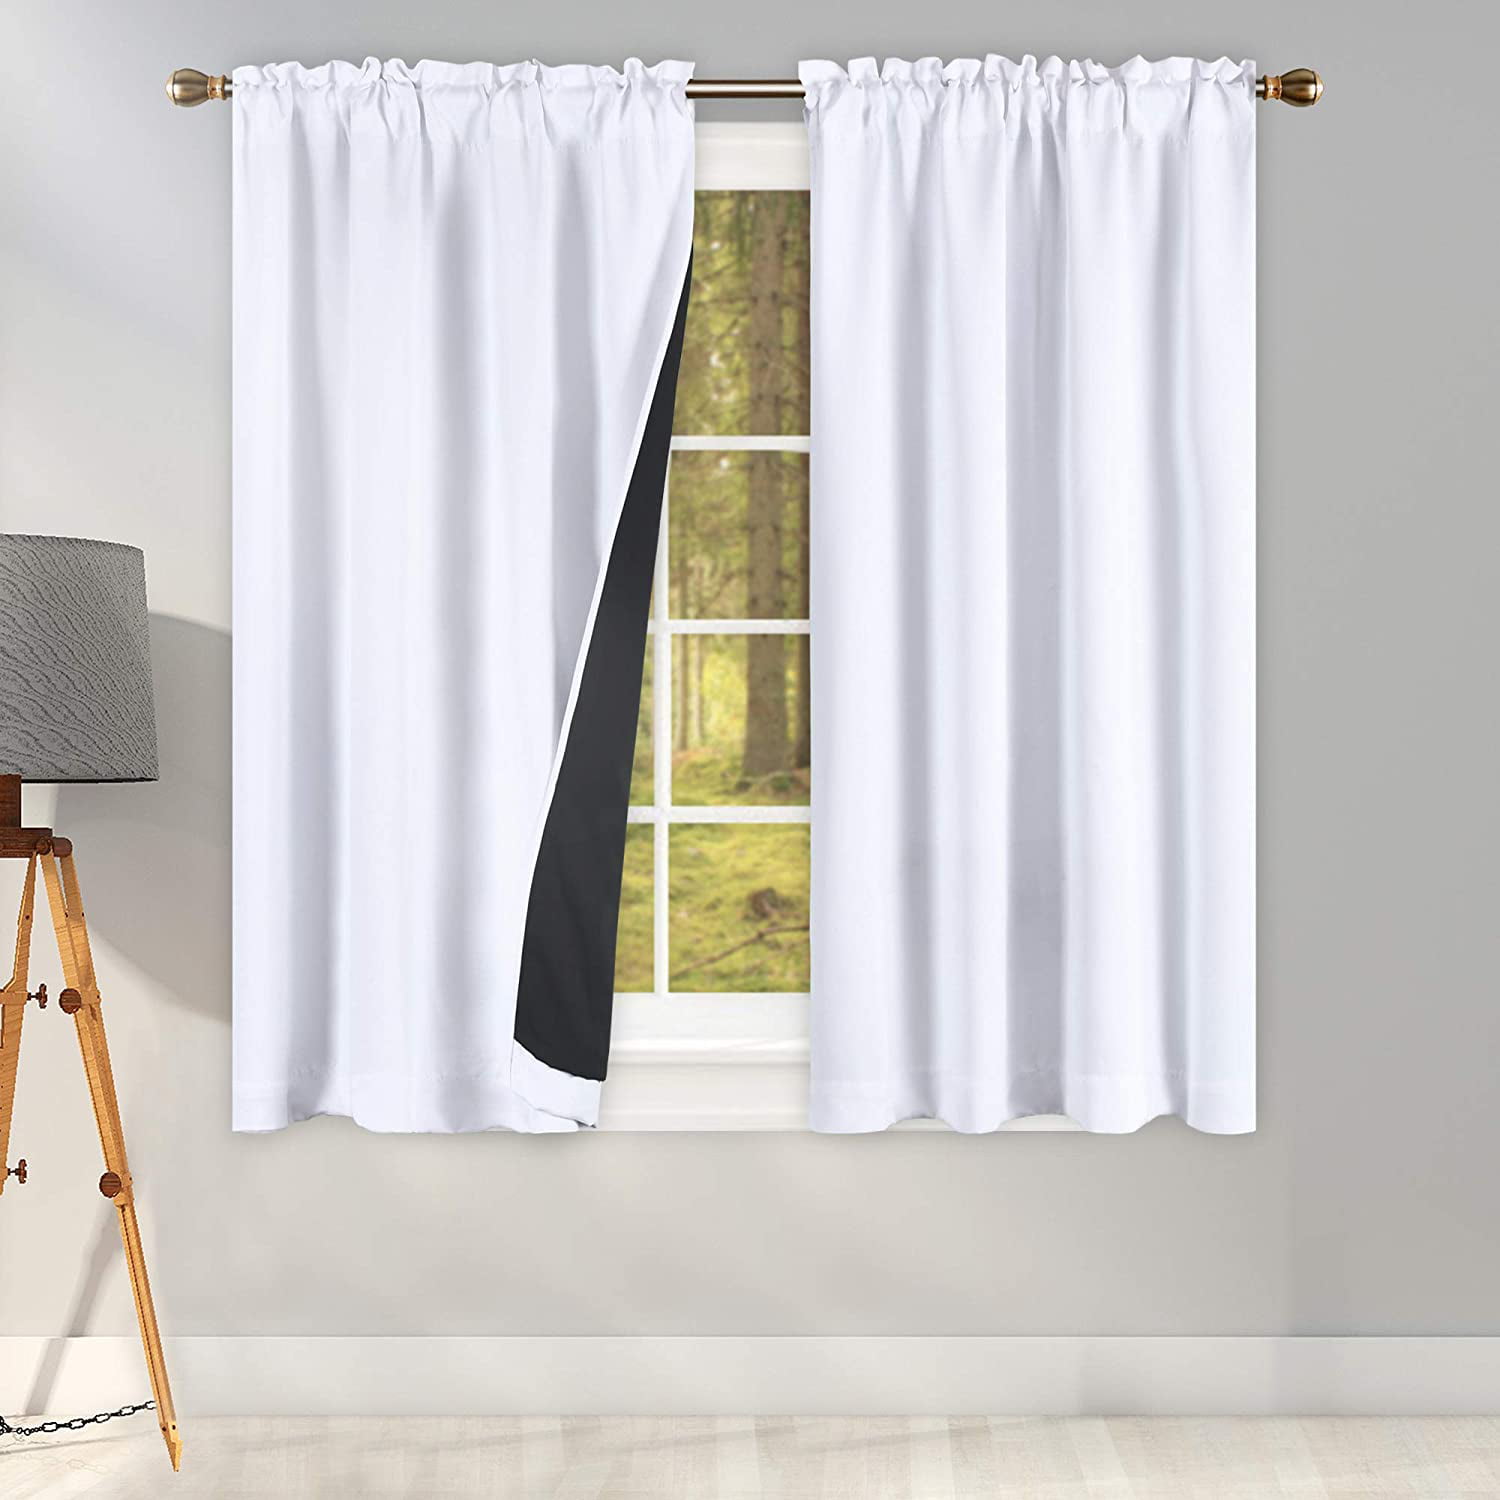 Blackout Curtains Rod Pocket Top Drapes for Bedroom,42 W x 45 L 2 Panels 